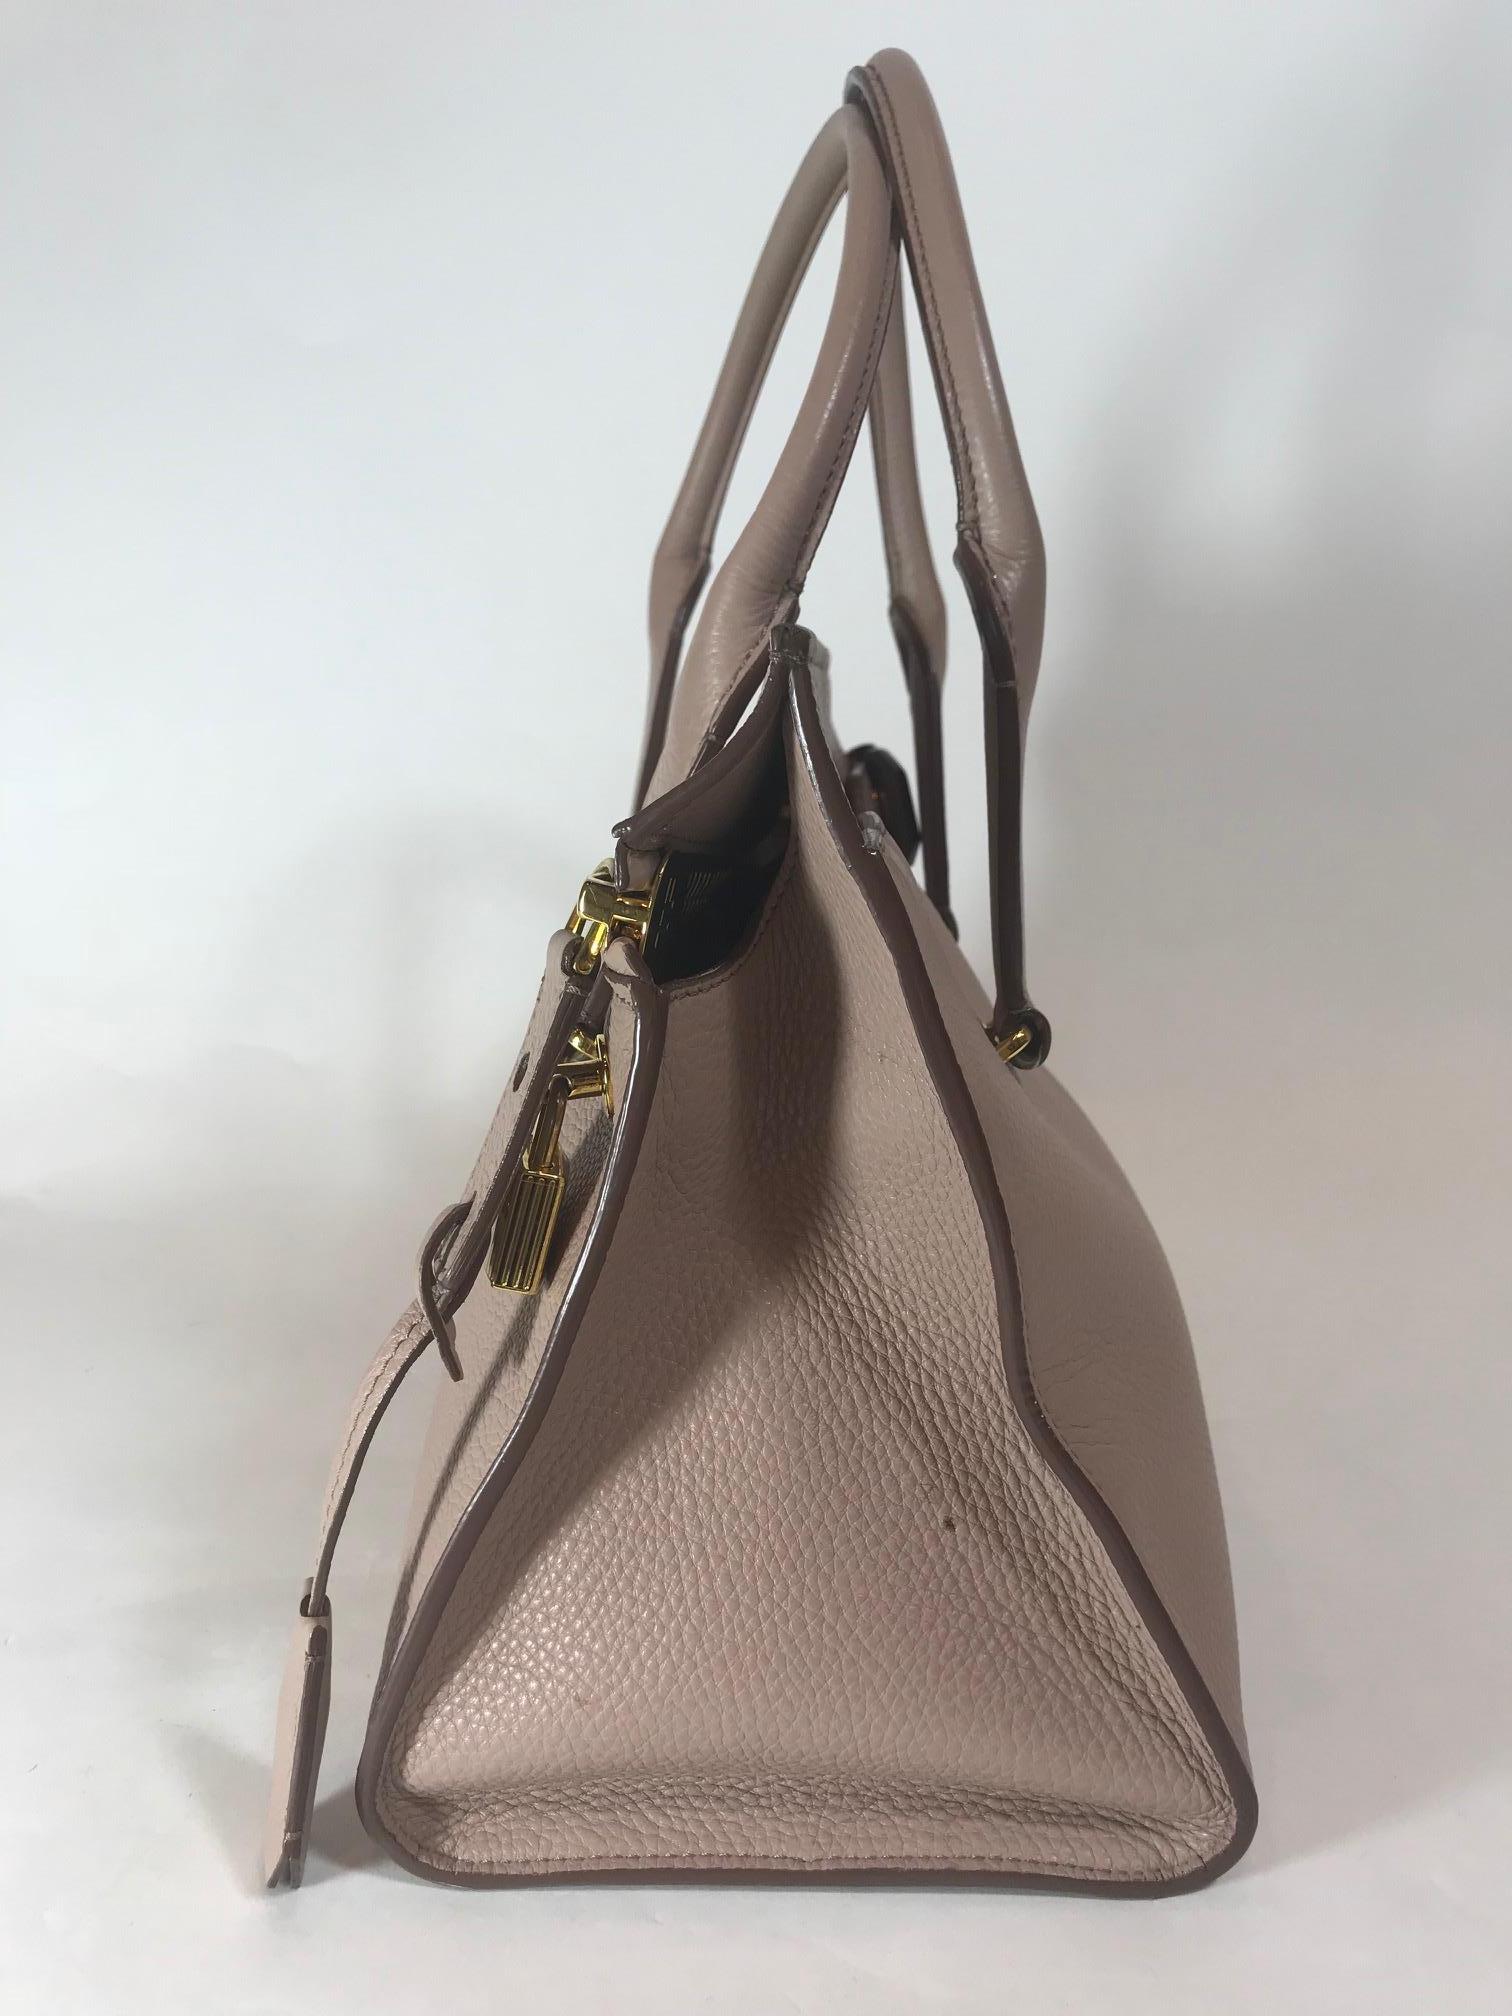 Dusty pink grained leather. Gold-tone hardware. Main zip closure at back featuring oversized zipper. Dual rolled shoulder straps. Single slit pocket at front with magnetic snap. Beige suede lining. Two interior opened pockets and one interior